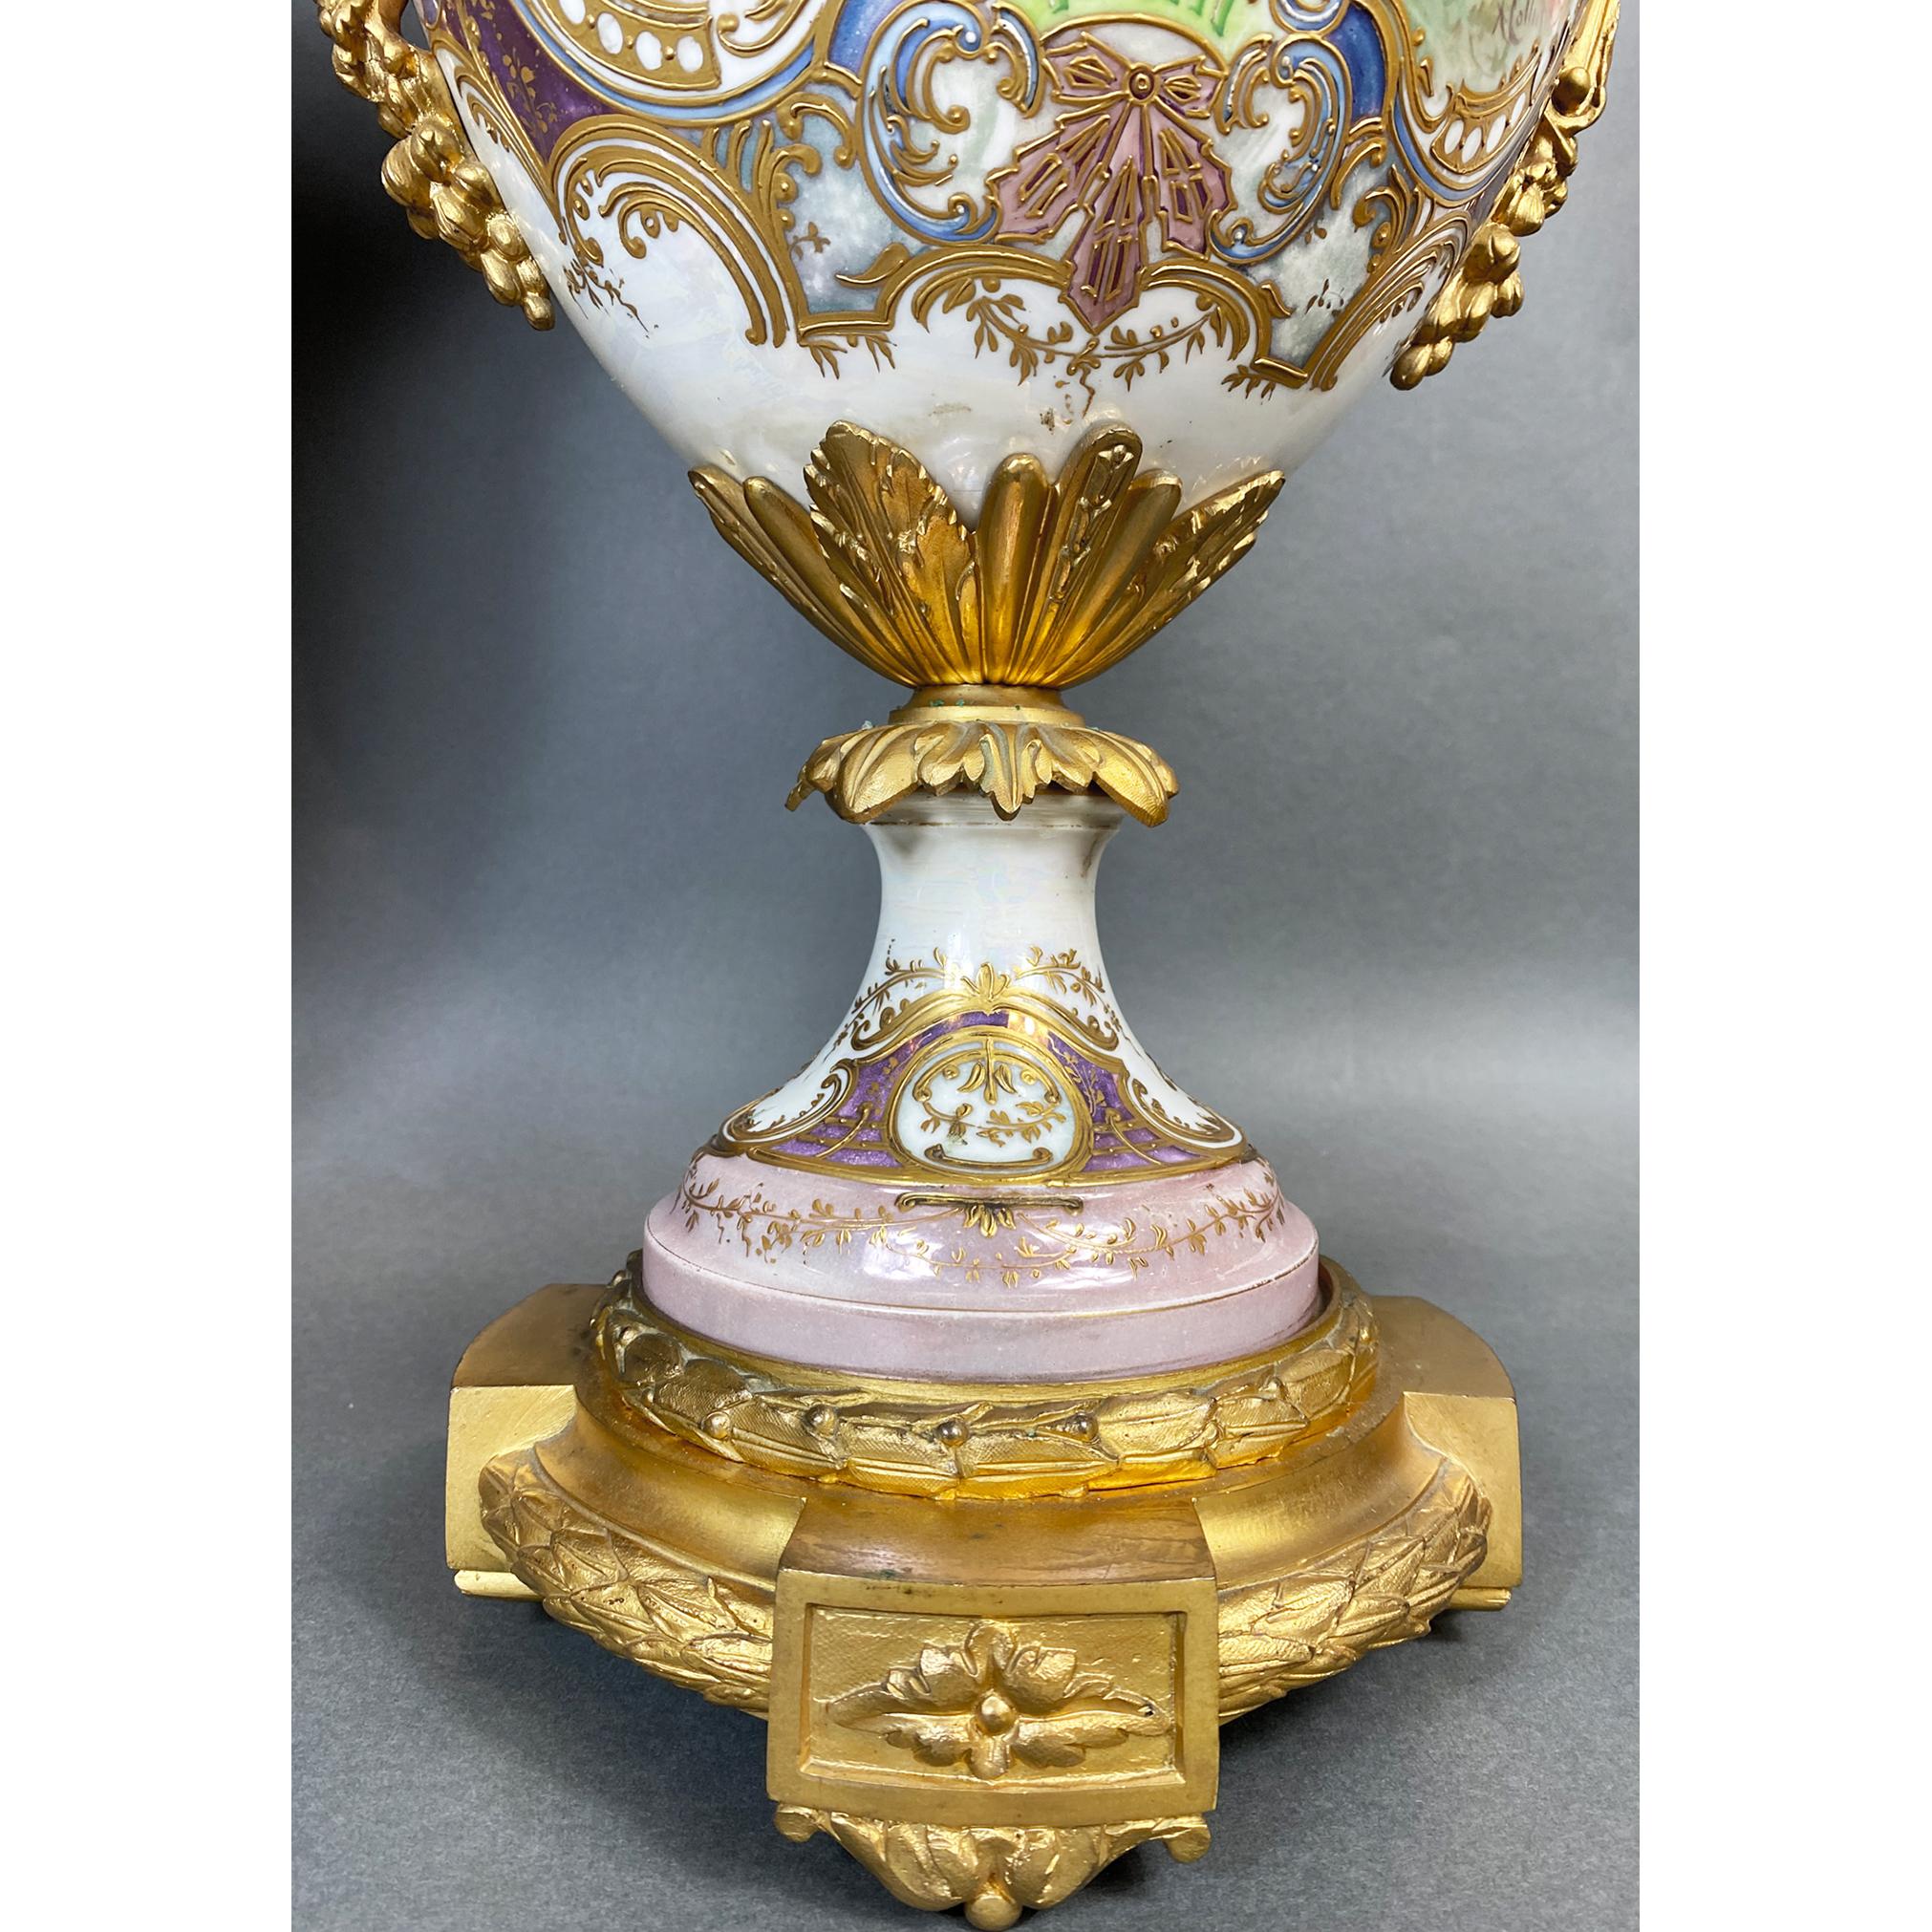 Pair of Ormolu-Mounted Sevres Style Vases with Garden Scene by A. Collot For Sale 5